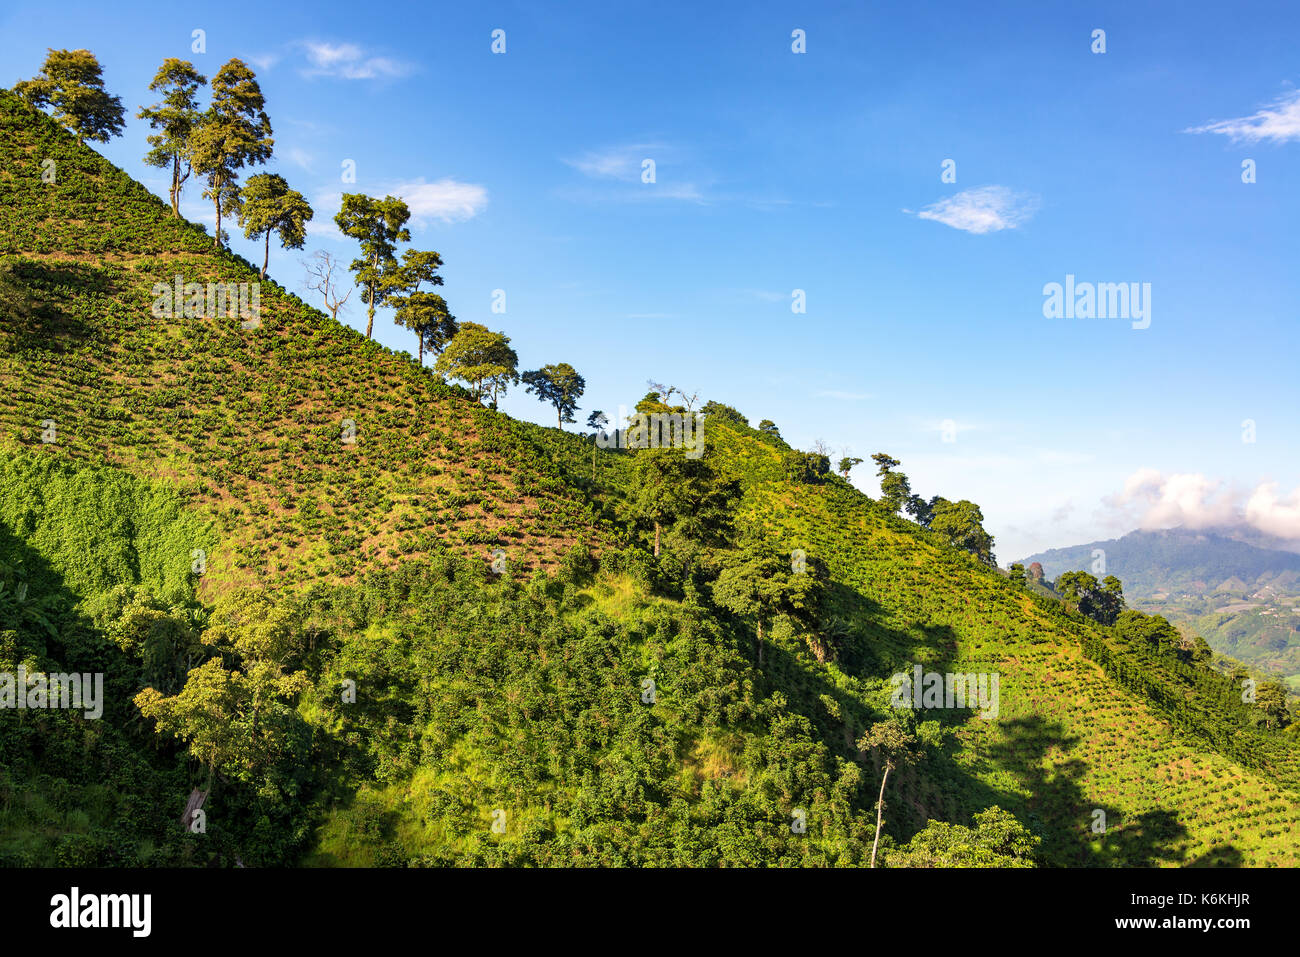 Hills covered in coffee plants with a beautiful blue sky near Manizales, Colombia Stock Photo